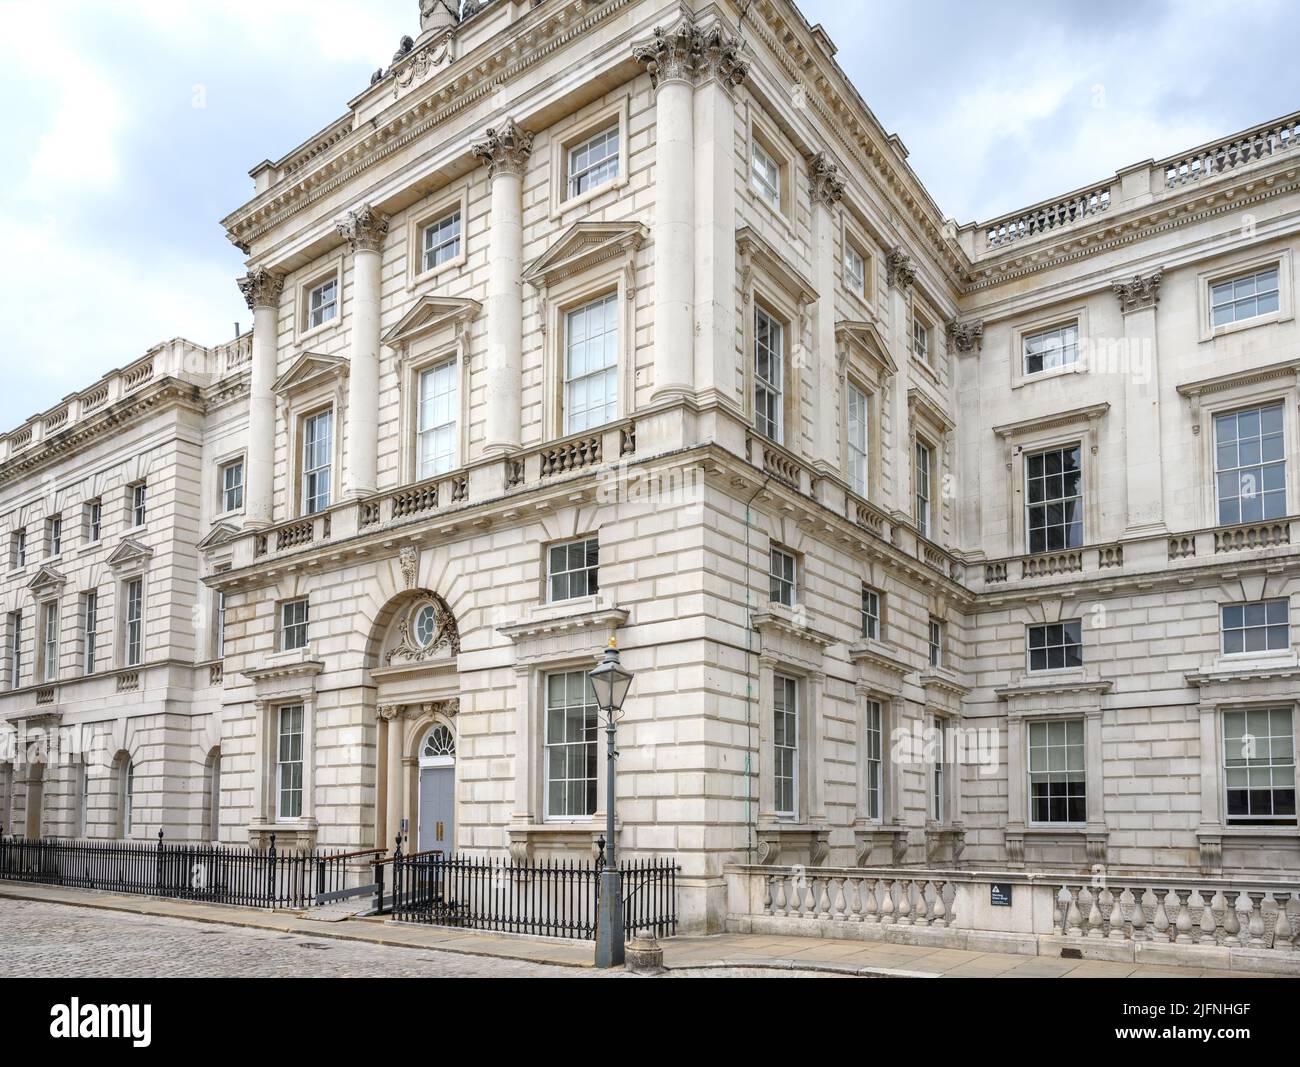 Galerie Courtauld, Somerset House, The Strand, Londres, Angleterre, ROYAUME-UNI Banque D'Images